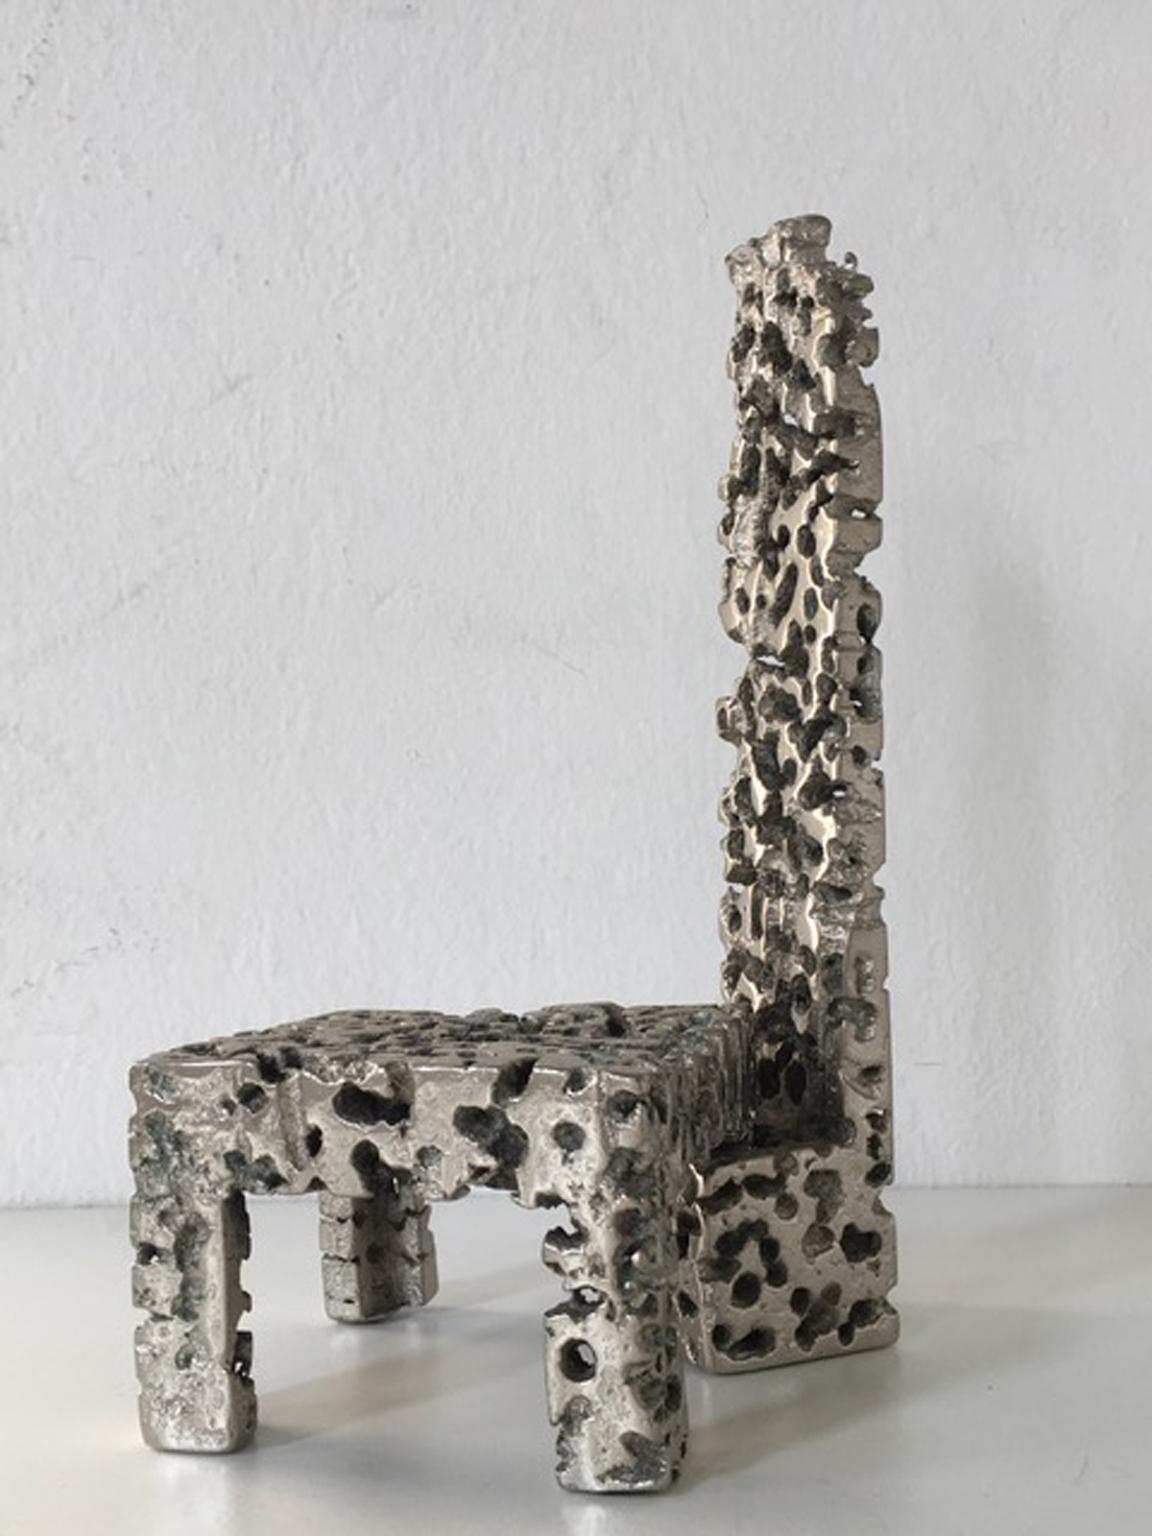 Urano Palma is an Italian artist who starts to create his artworks following the philosophy of Lucio Fontana.
He specially worked to the sculptured furniture, inventing a casting technique to obtain the perforated solid metal.
The chair is separated